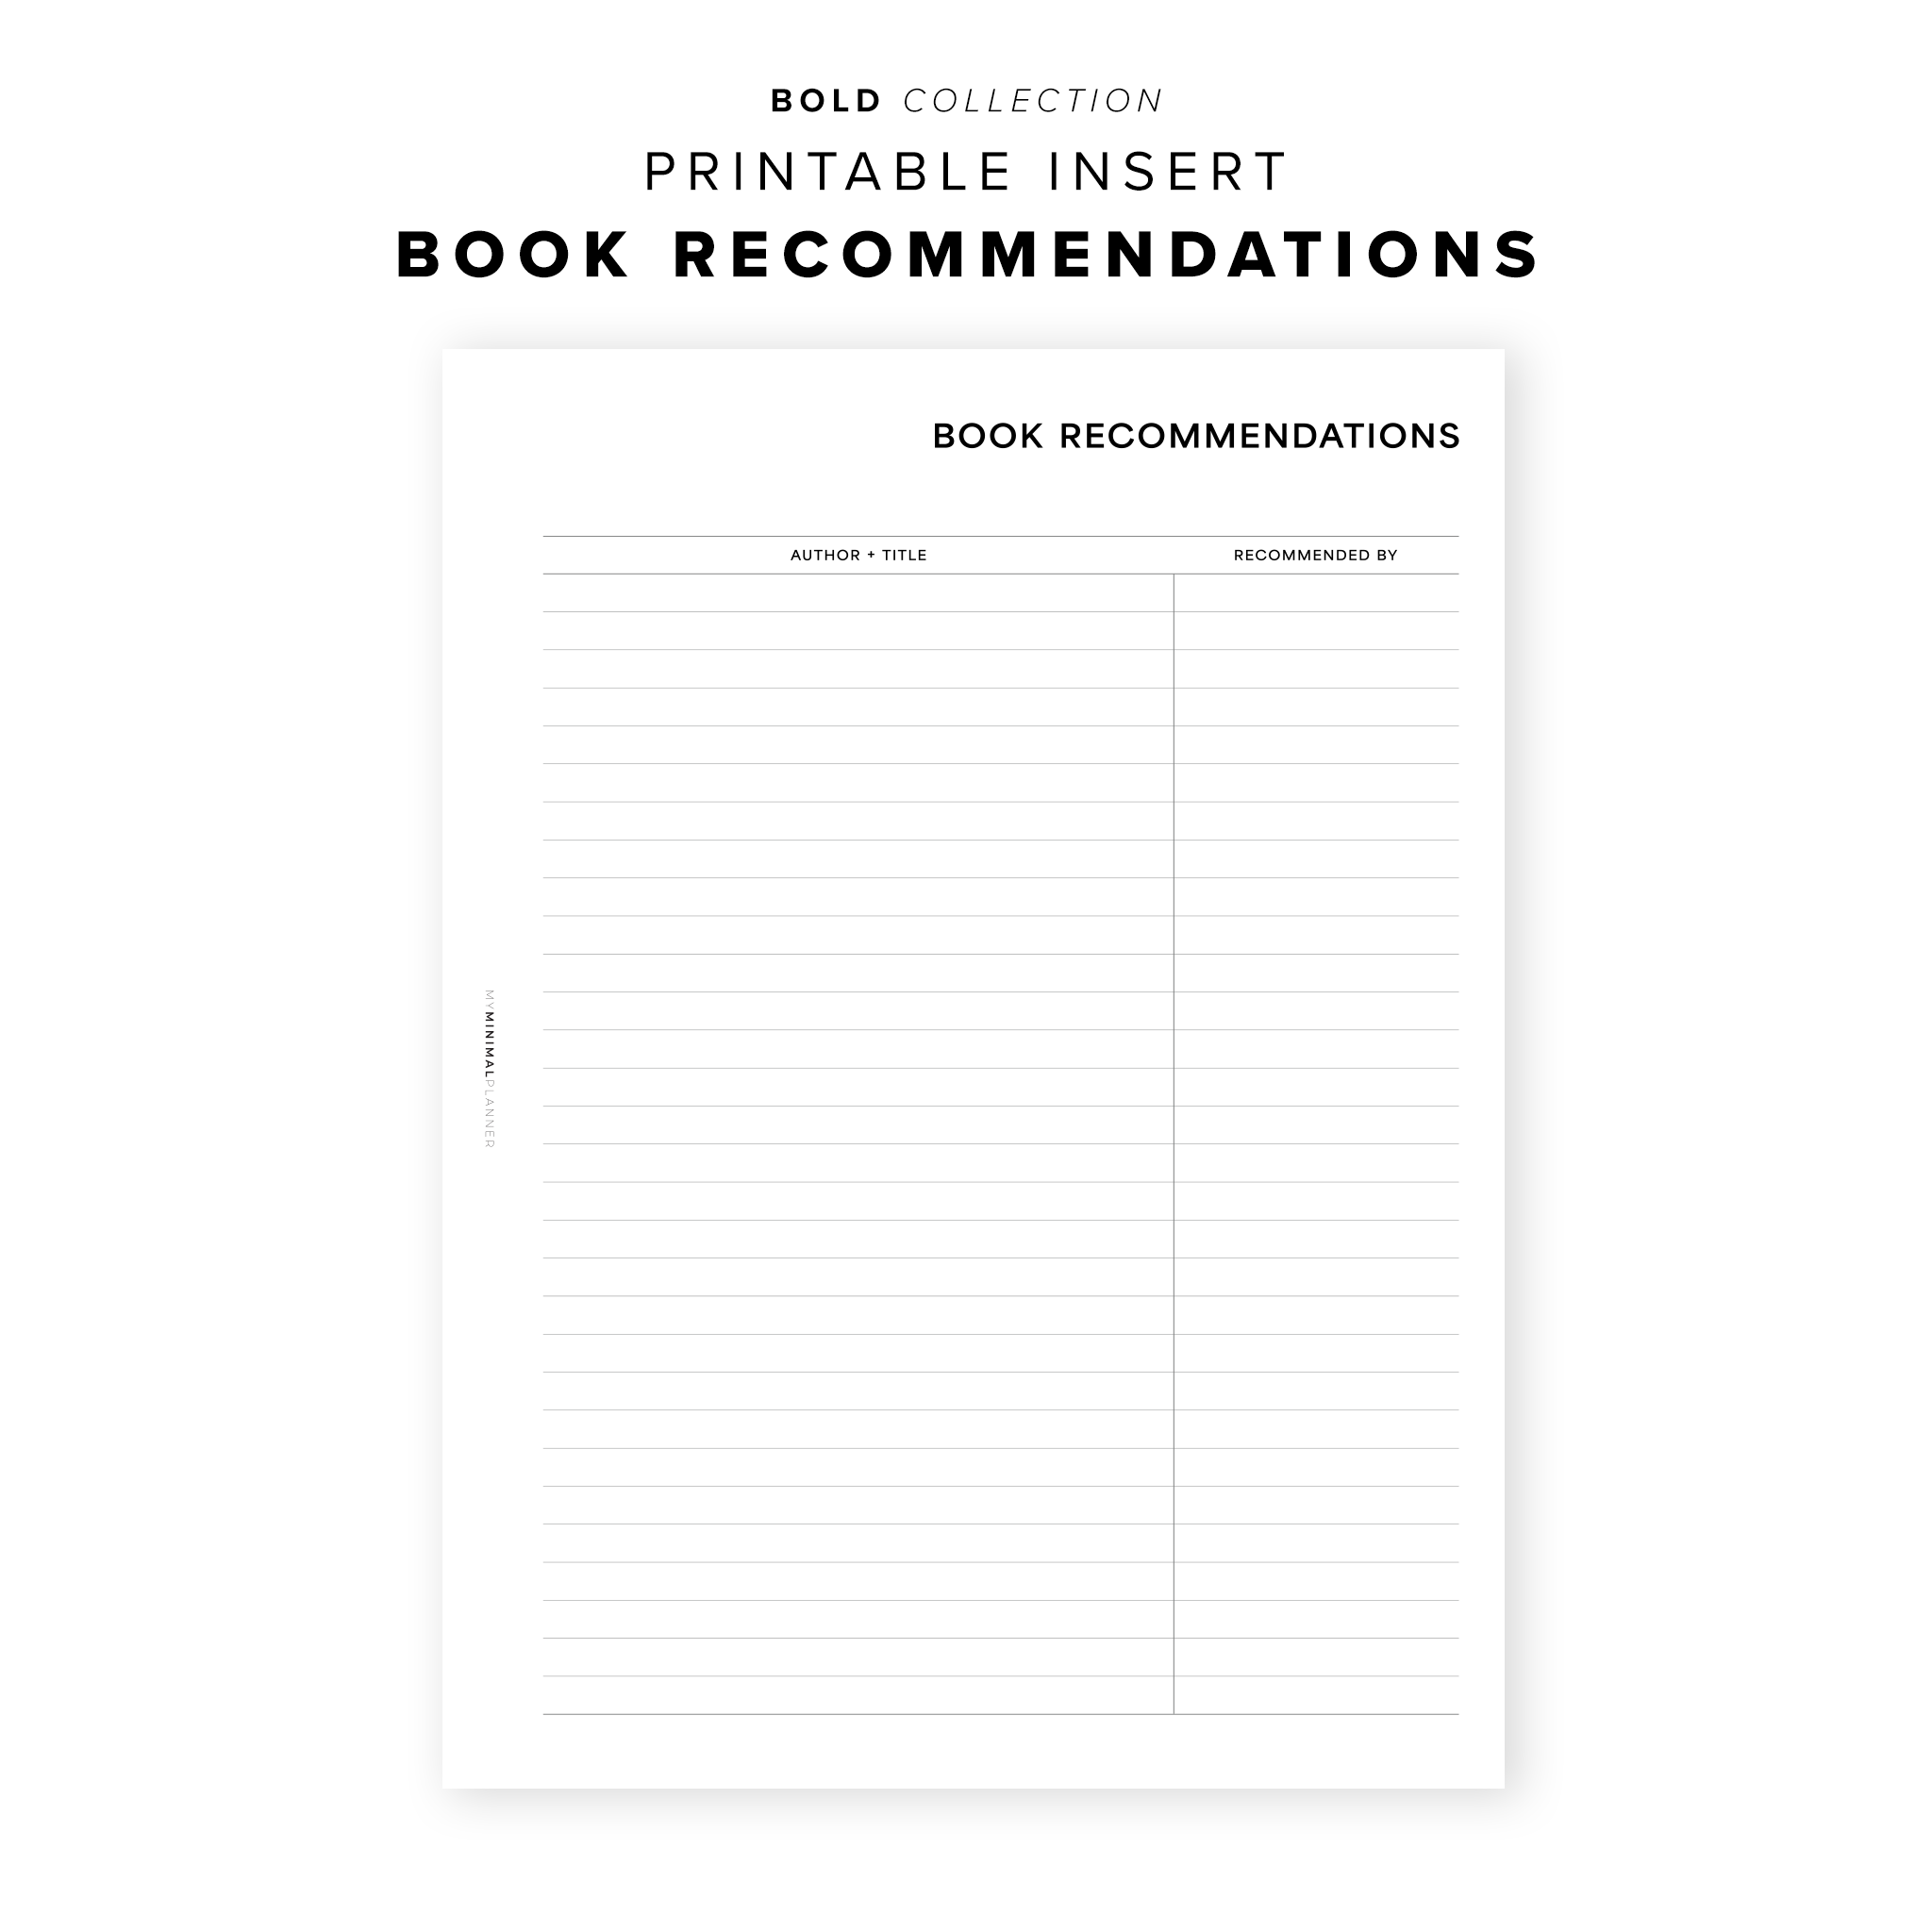 PR200 - Book Recommendations - Printable Insert